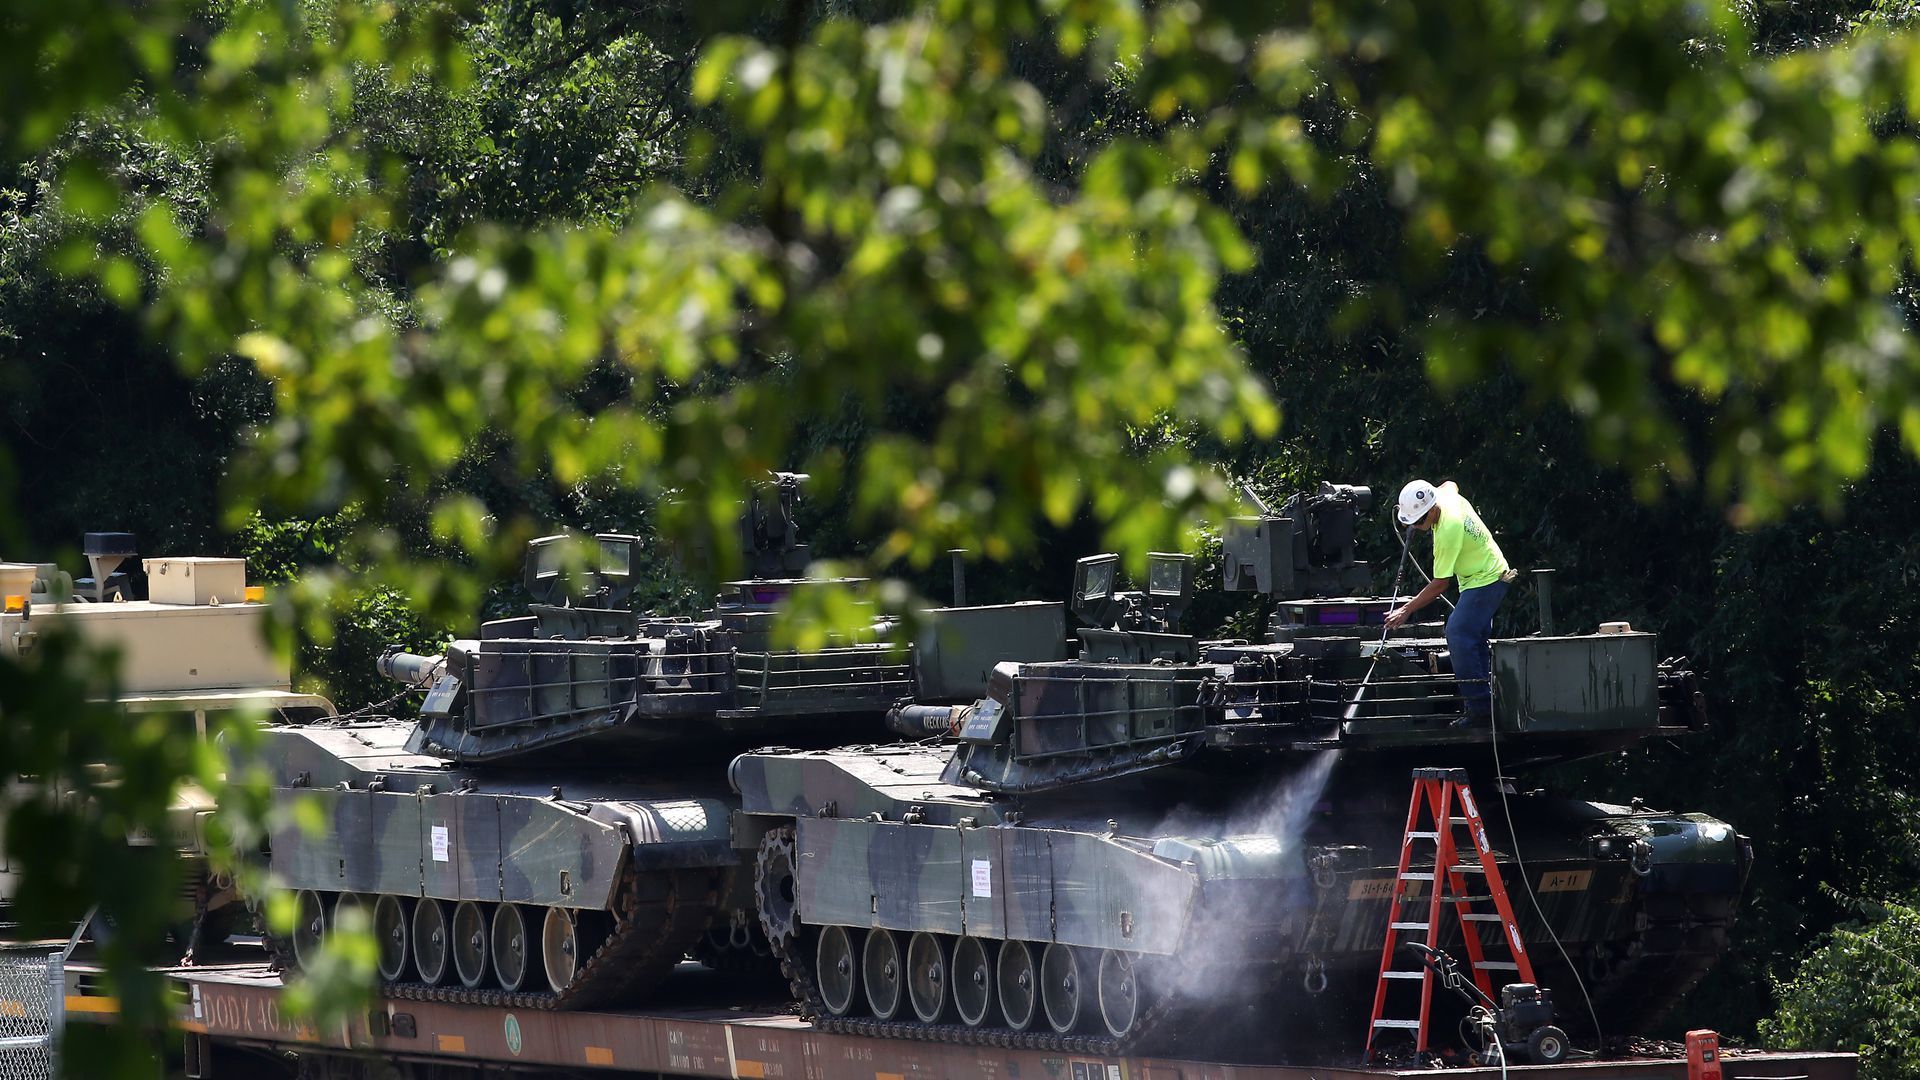 M1A1 Abrams tanks on rail cars in Washington, D.C., ahead of the "Salute to America" event. 